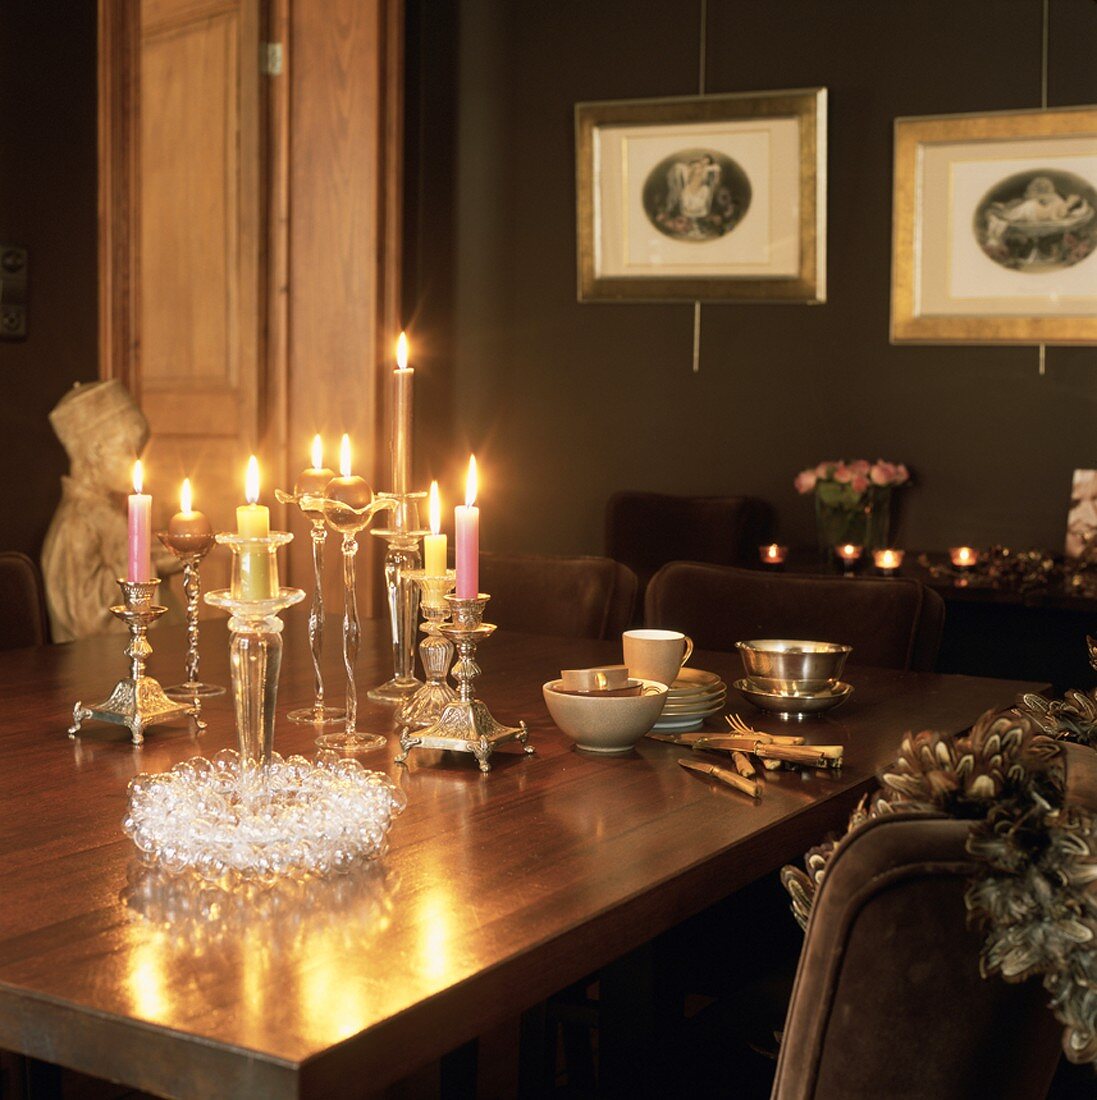 Christmas table and decorations in candlelight